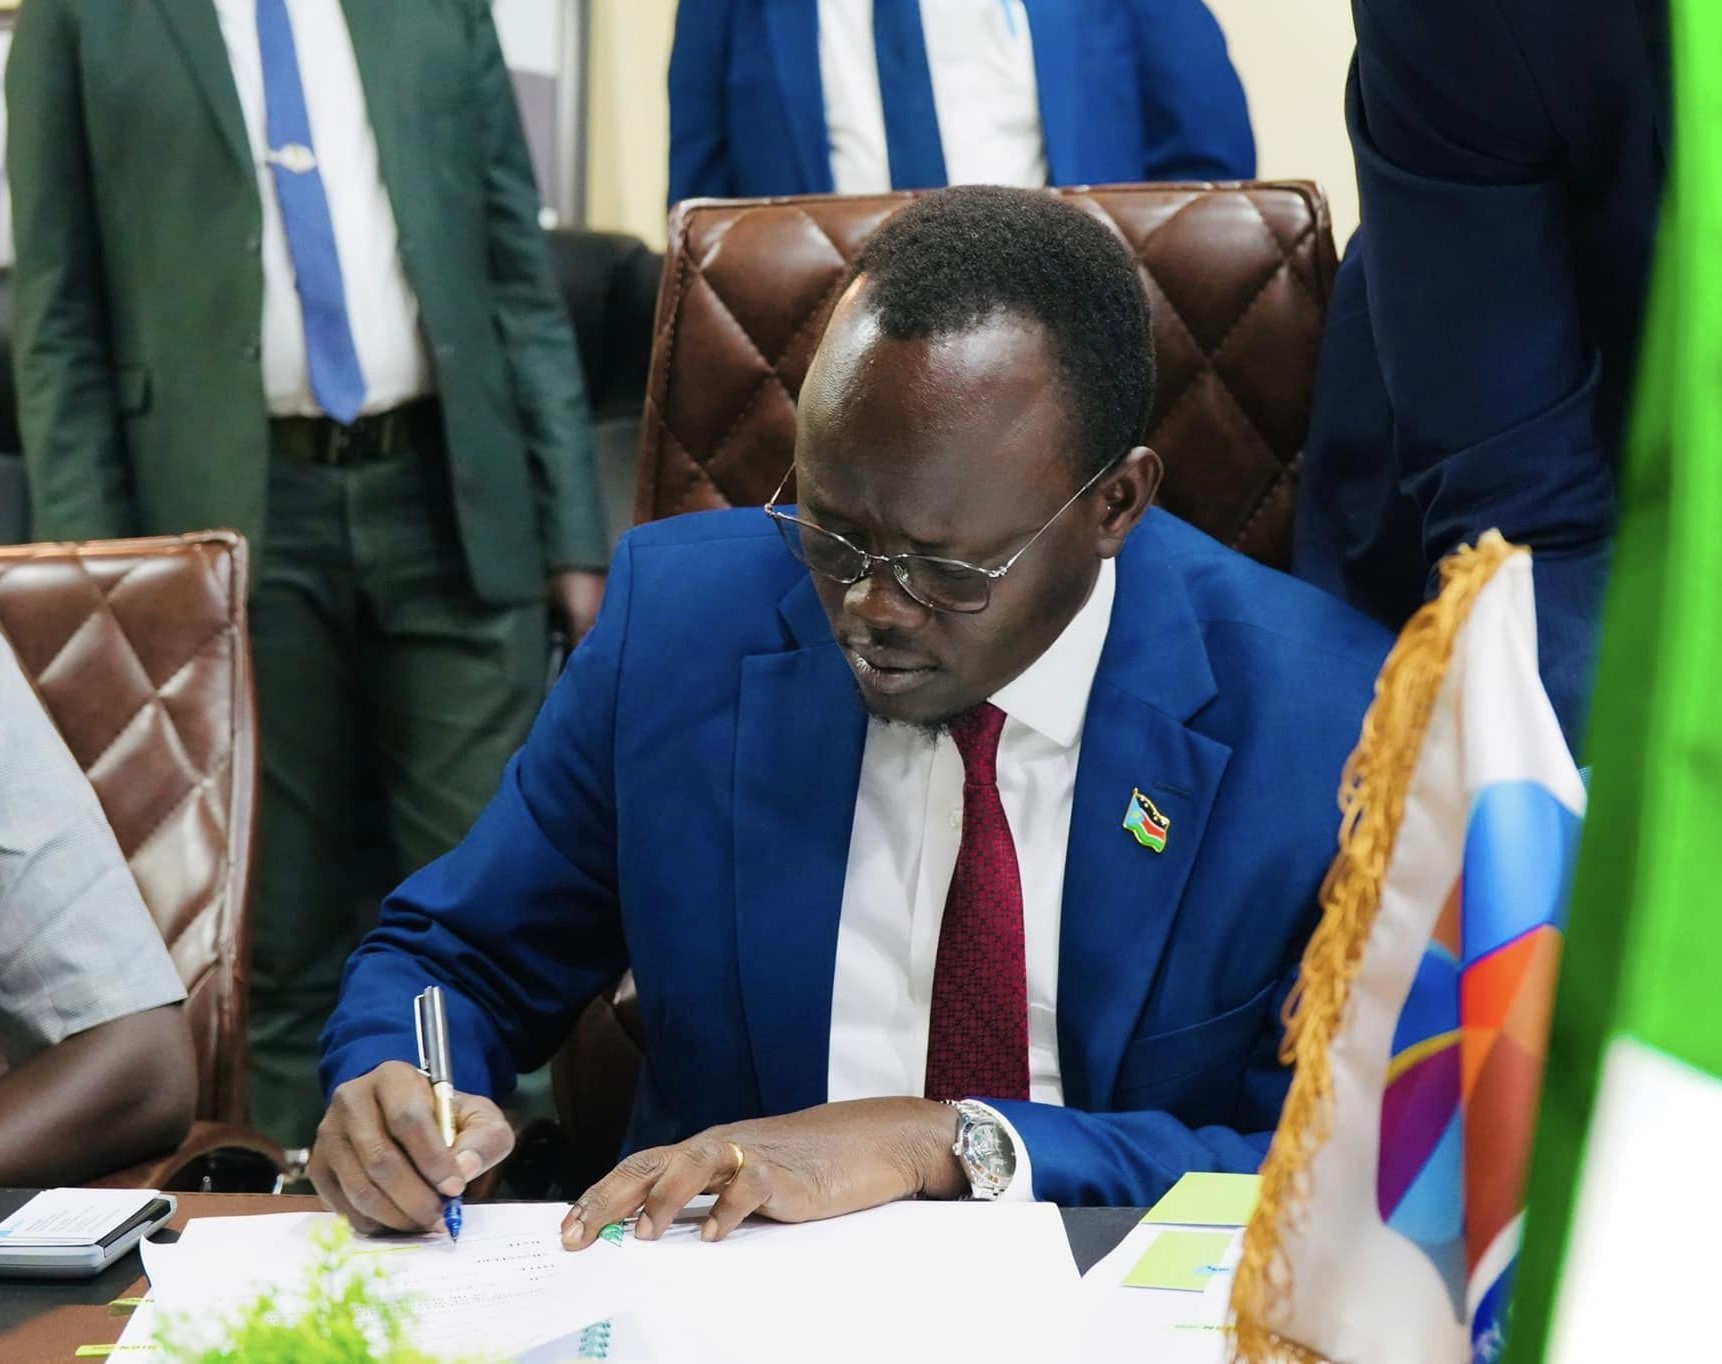 Finance Minister Bak signs $11.3m deal with AfDB, UNESCO